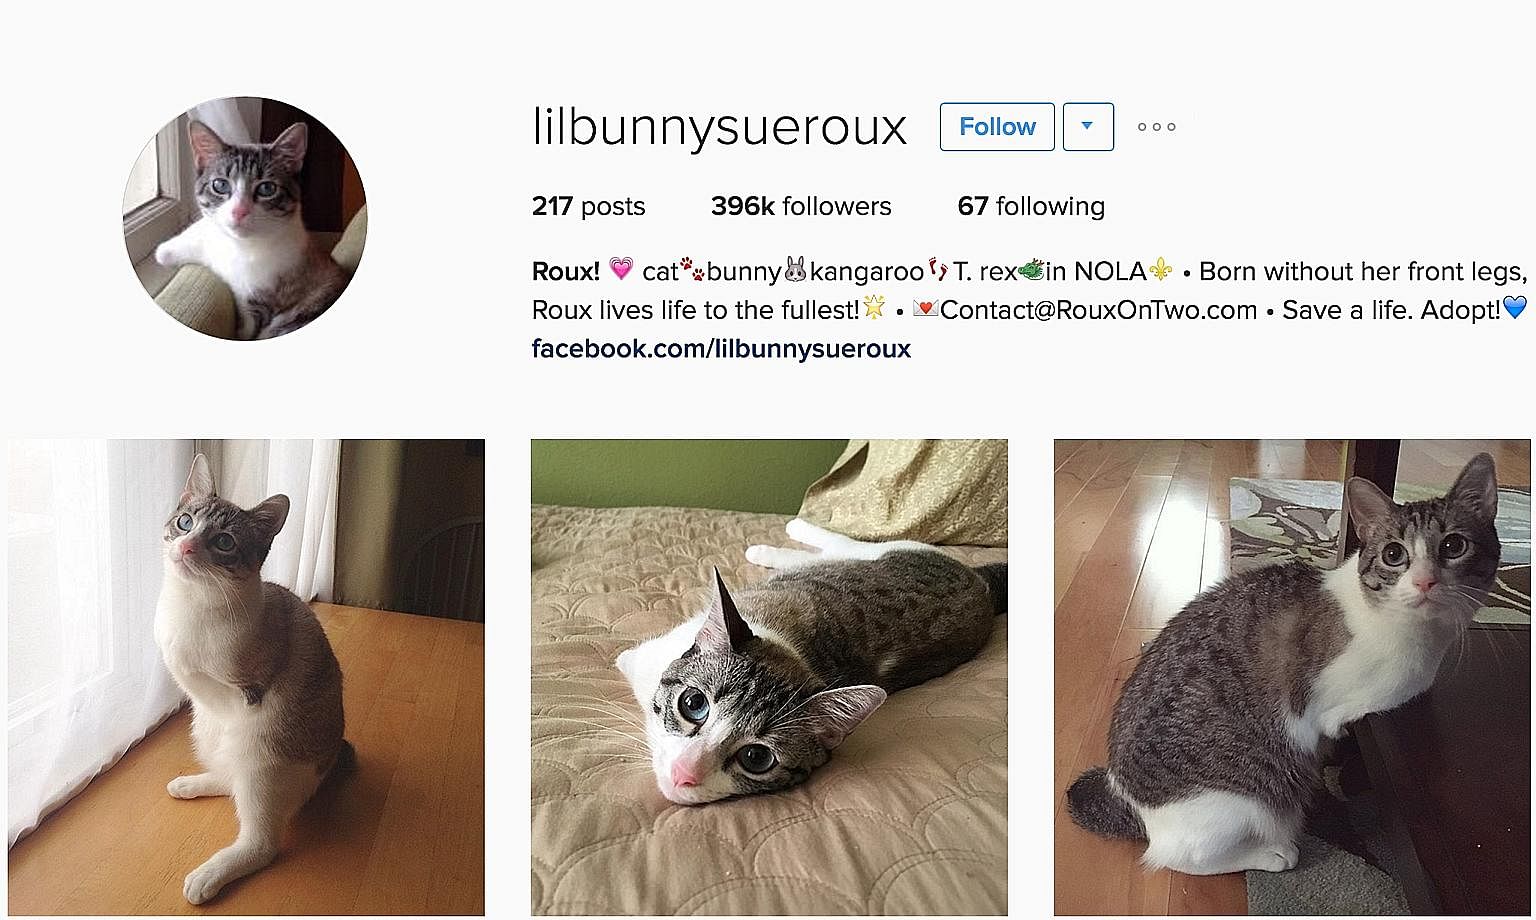 A crowd-funder set up to help pay for Speedy Boy Boy's medical bills reached its goal in less than 24 hours. But just over a week ago, the chihuahua died. Roux (above) is a cat born without front legs. Her Instagram account has close to 400,000 follo